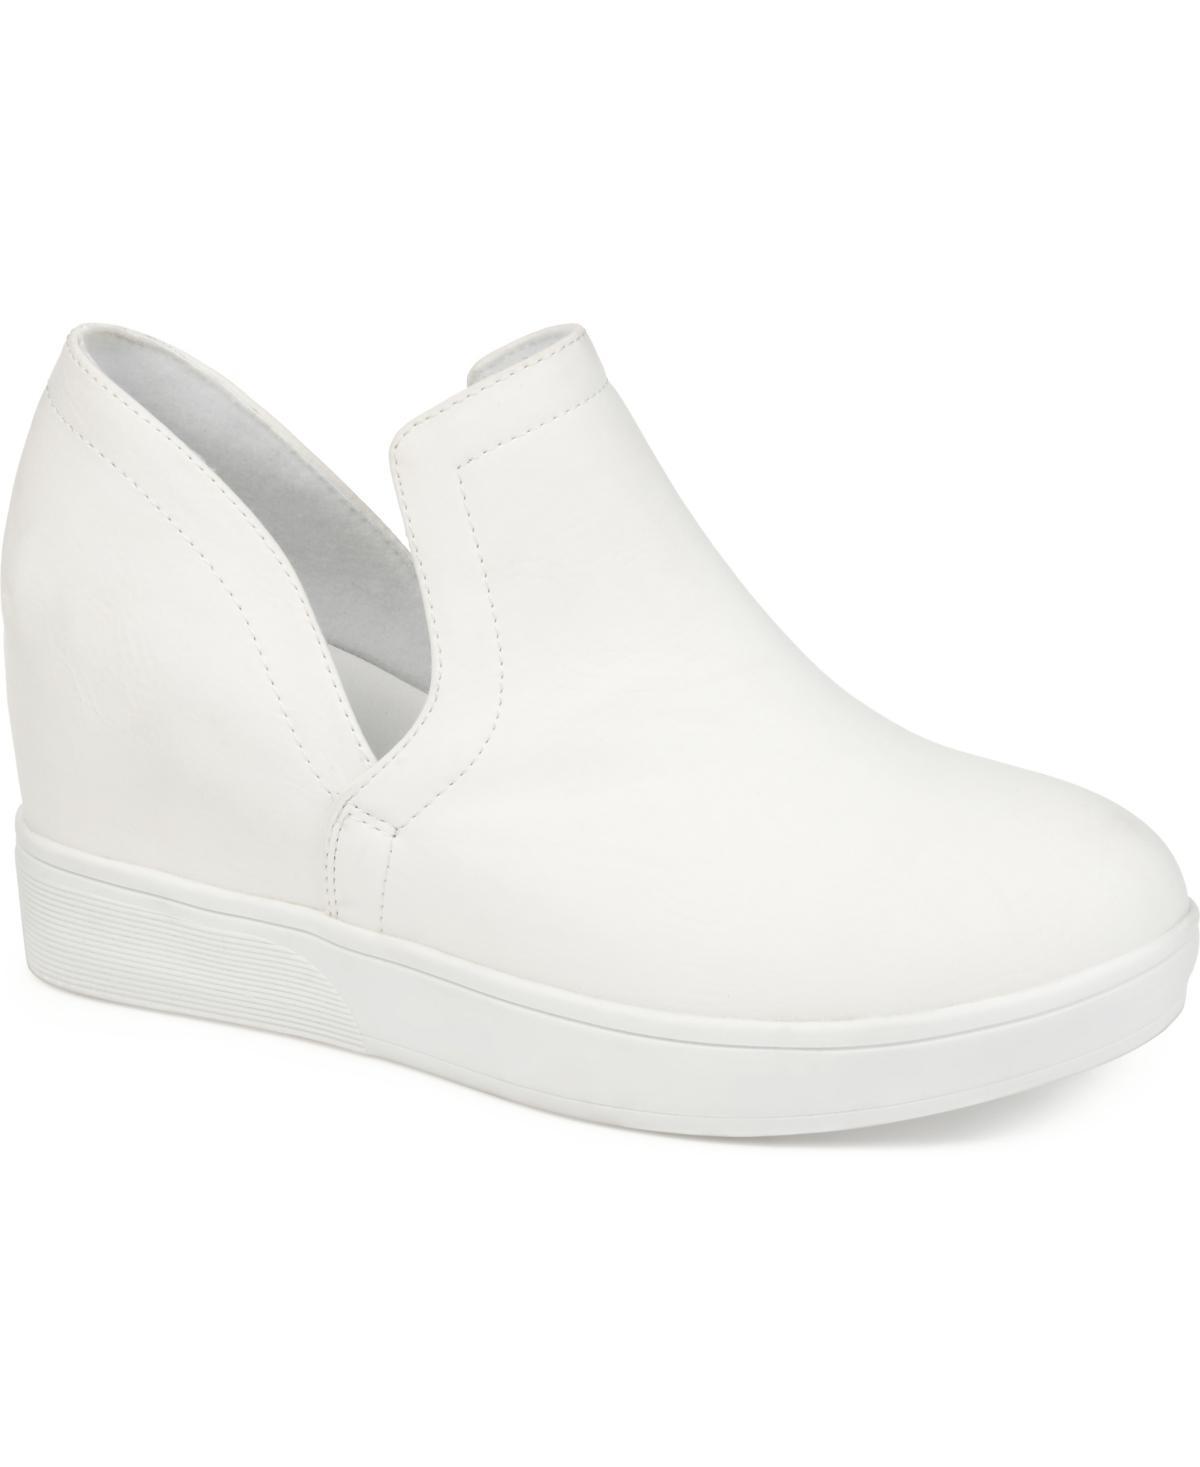 Journee Collection Cardi Womens Sneaker Wedges White Product Image